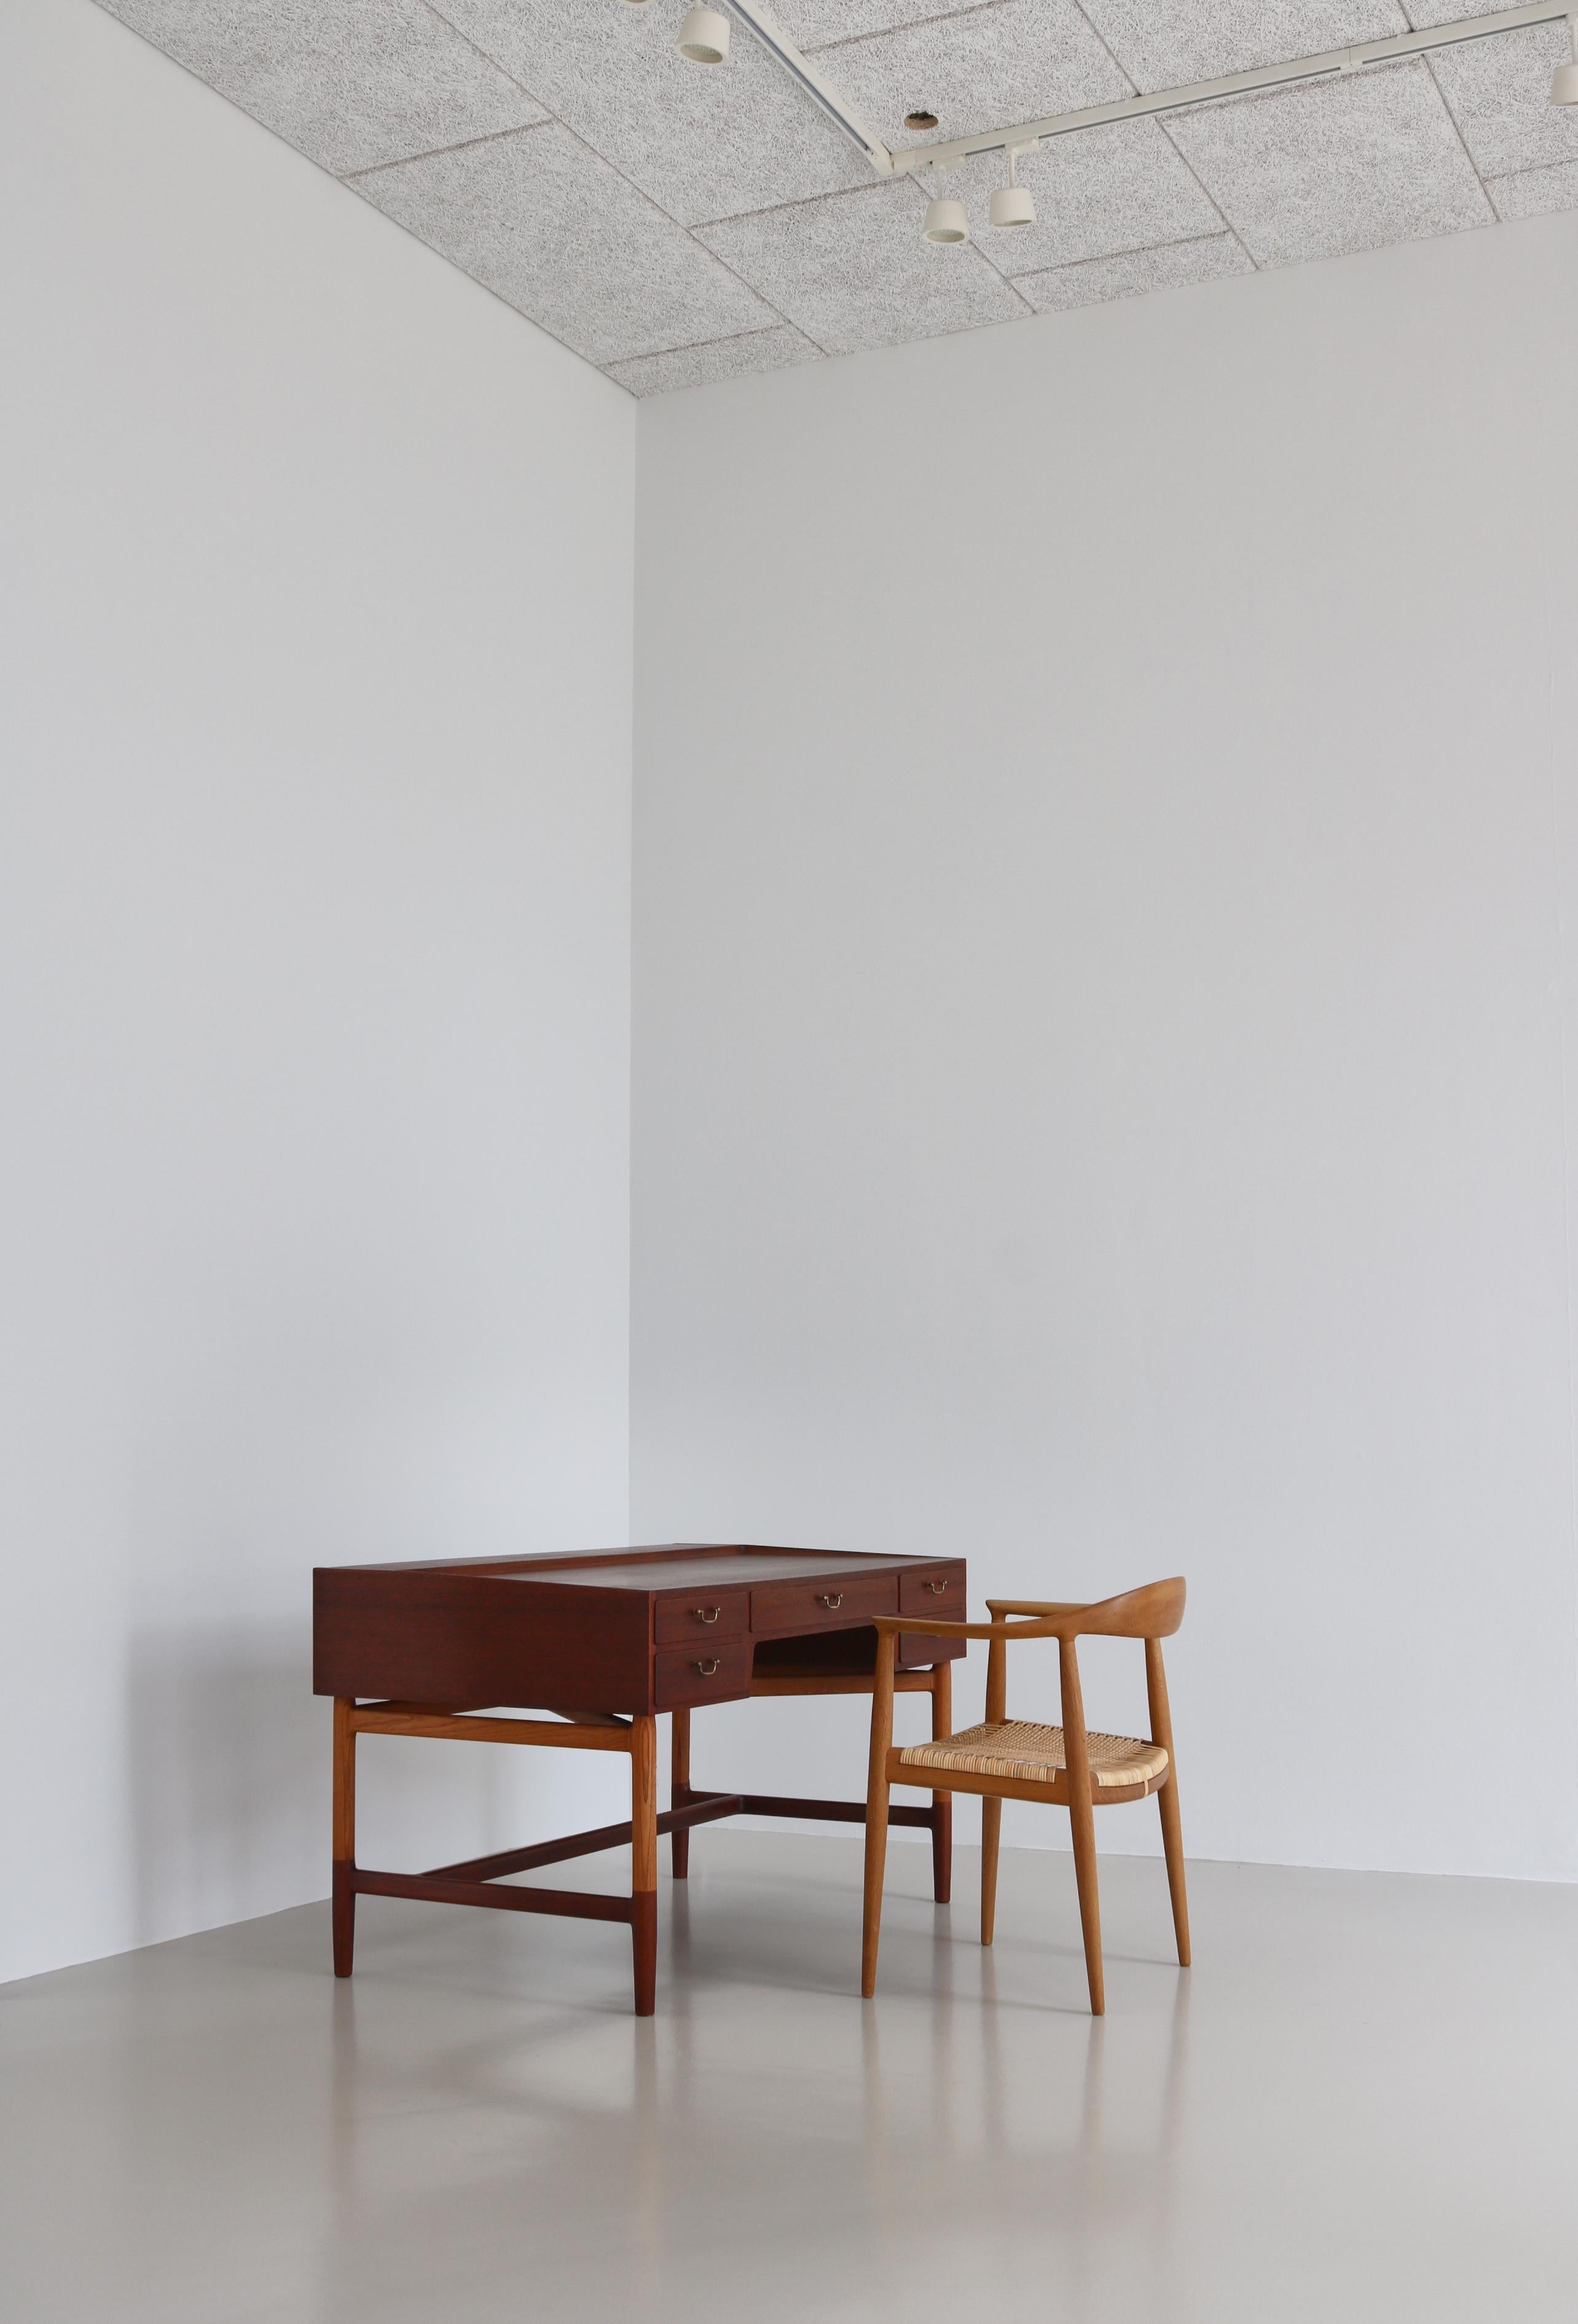 Amazing freestanding work desk by Danish designer Kurt Østervig made for himself in the early 1950s. Østervig needed a desk that suited his own needs and came up with this unique design. The table is constructed so Østervig could be seated on one